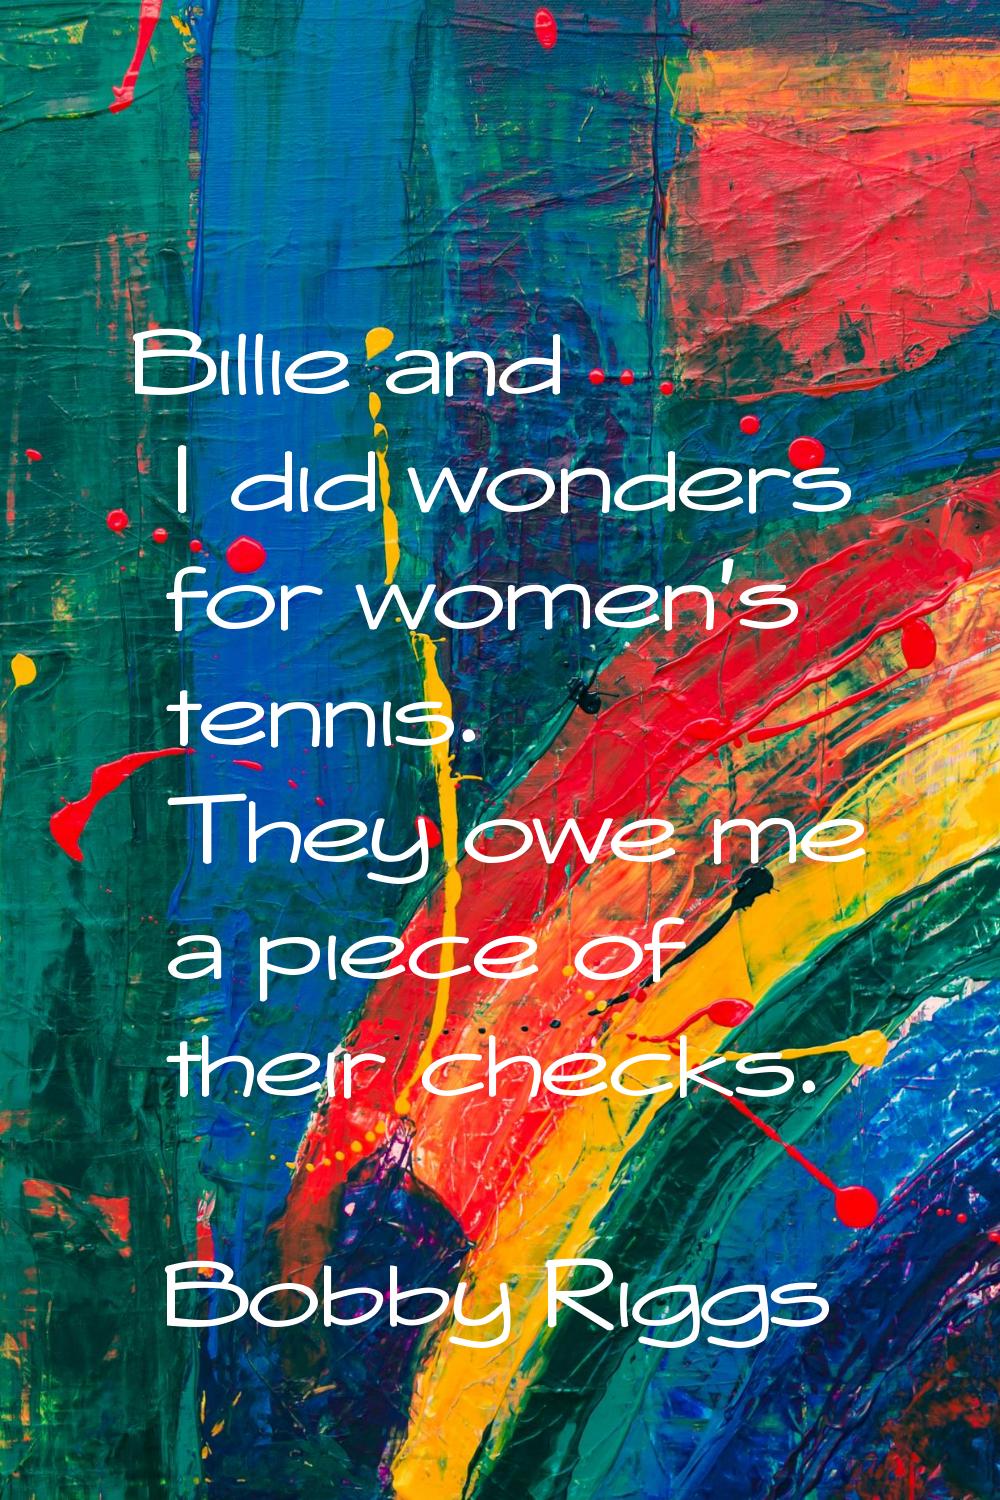 Billie and I did wonders for women's tennis. They owe me a piece of their checks.